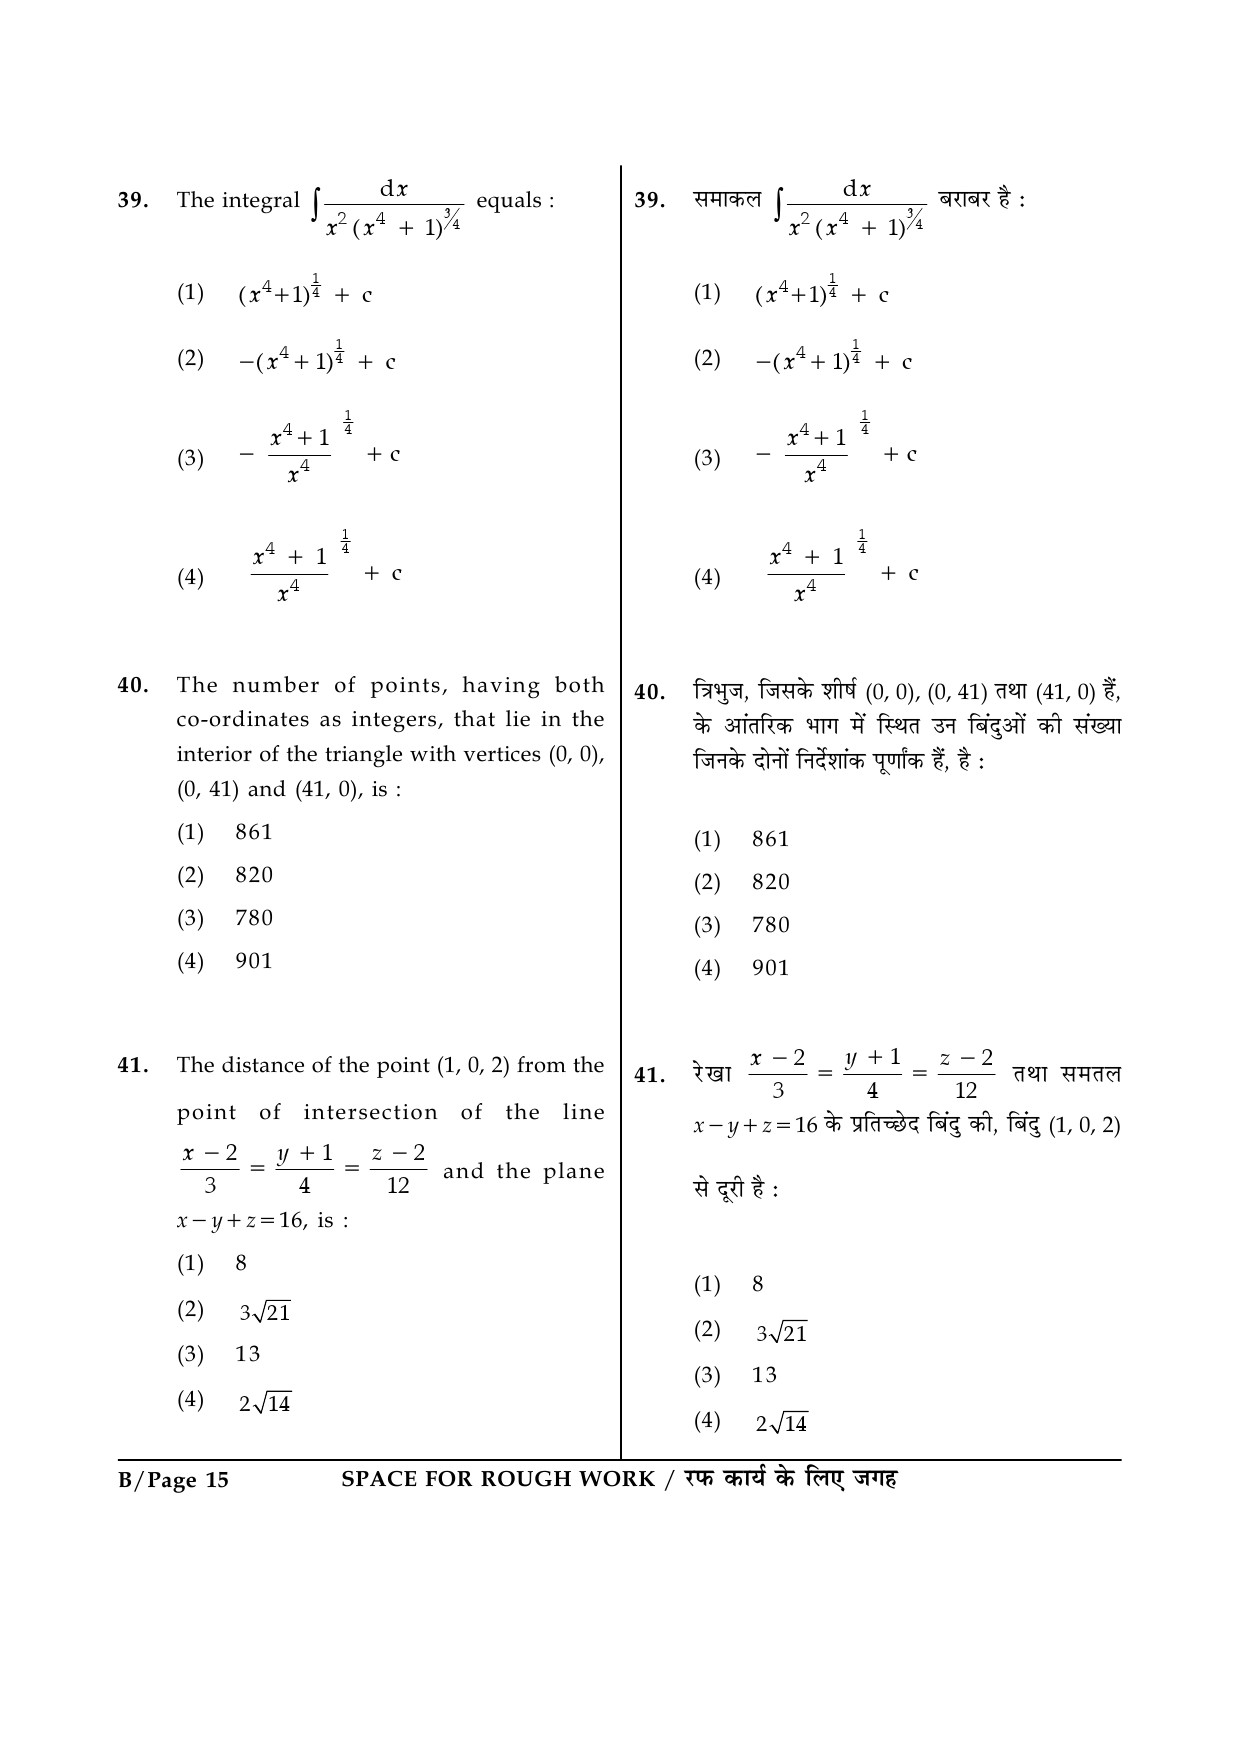 JEE Main Exam Question Paper 2015 Booklet B 15